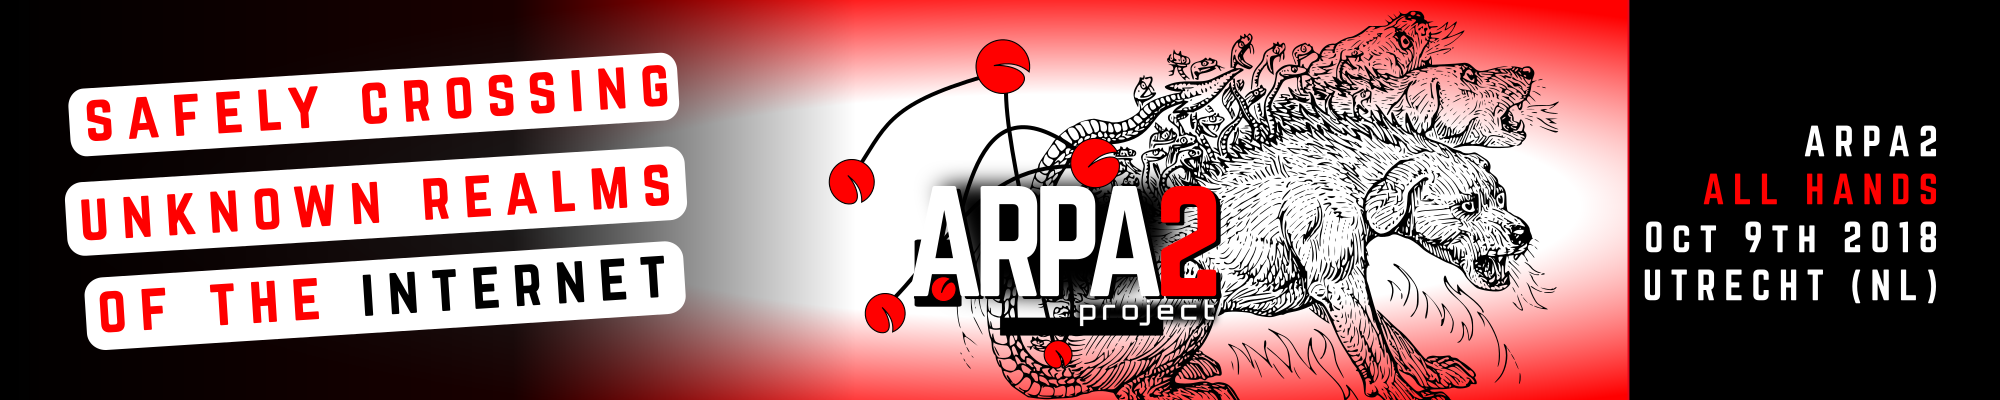 ARPA2 All Hands on October 9th 2018